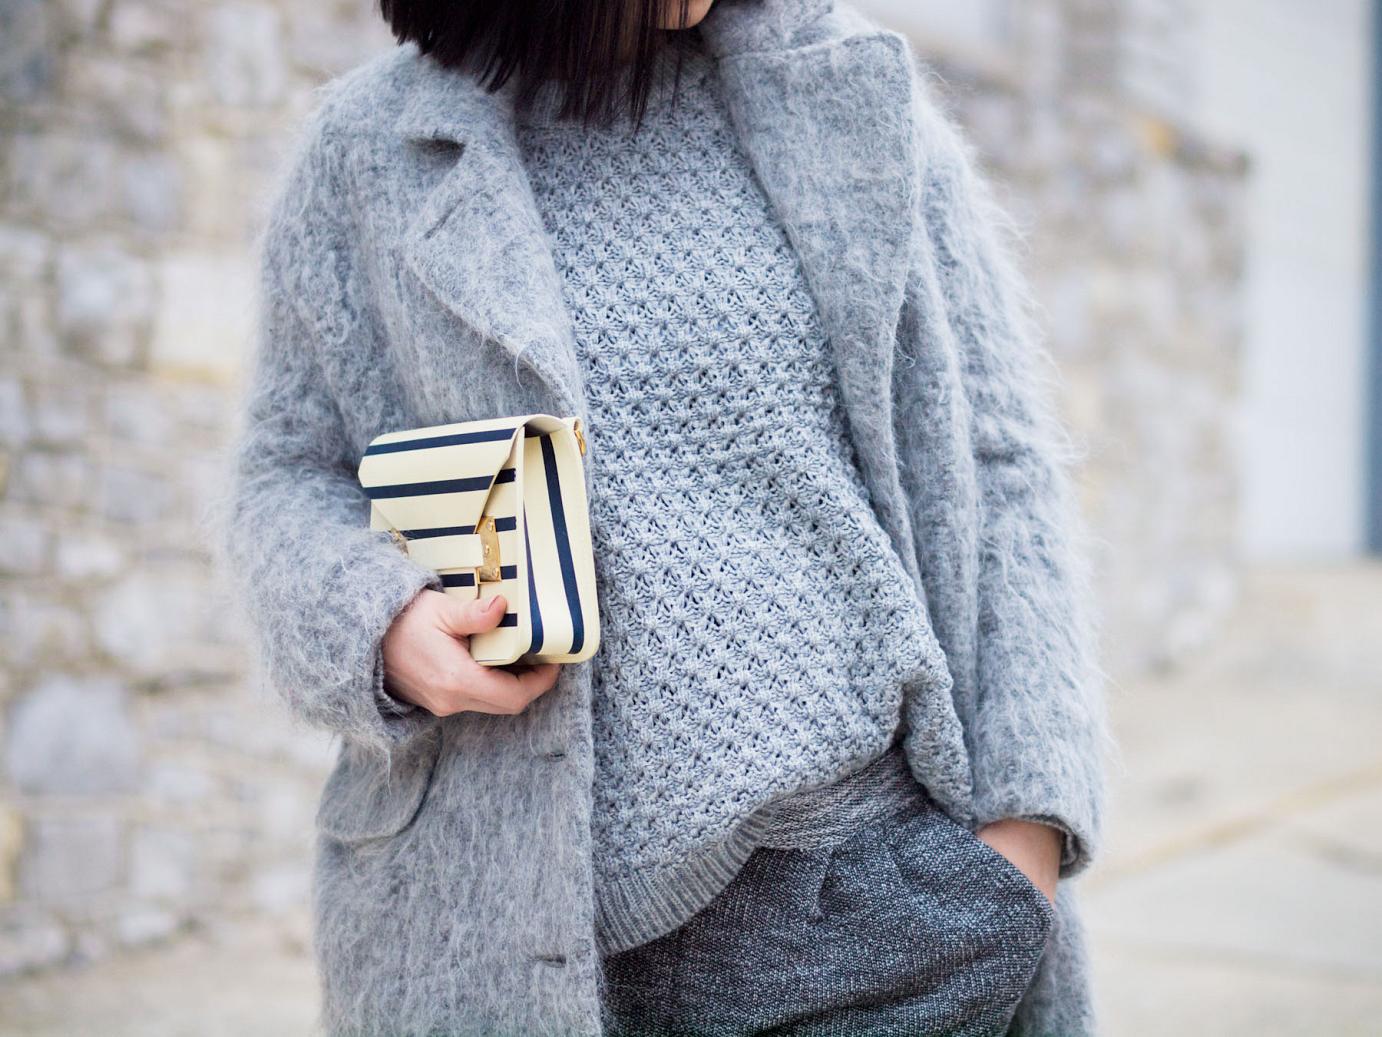 bittersweet colours, grey coat, fuzzy coat, grey outfit, konstantina tzovolou shoes, sophie hulme bag, fall street style, street style, maternity style, 25 weeks, sweater weather, 